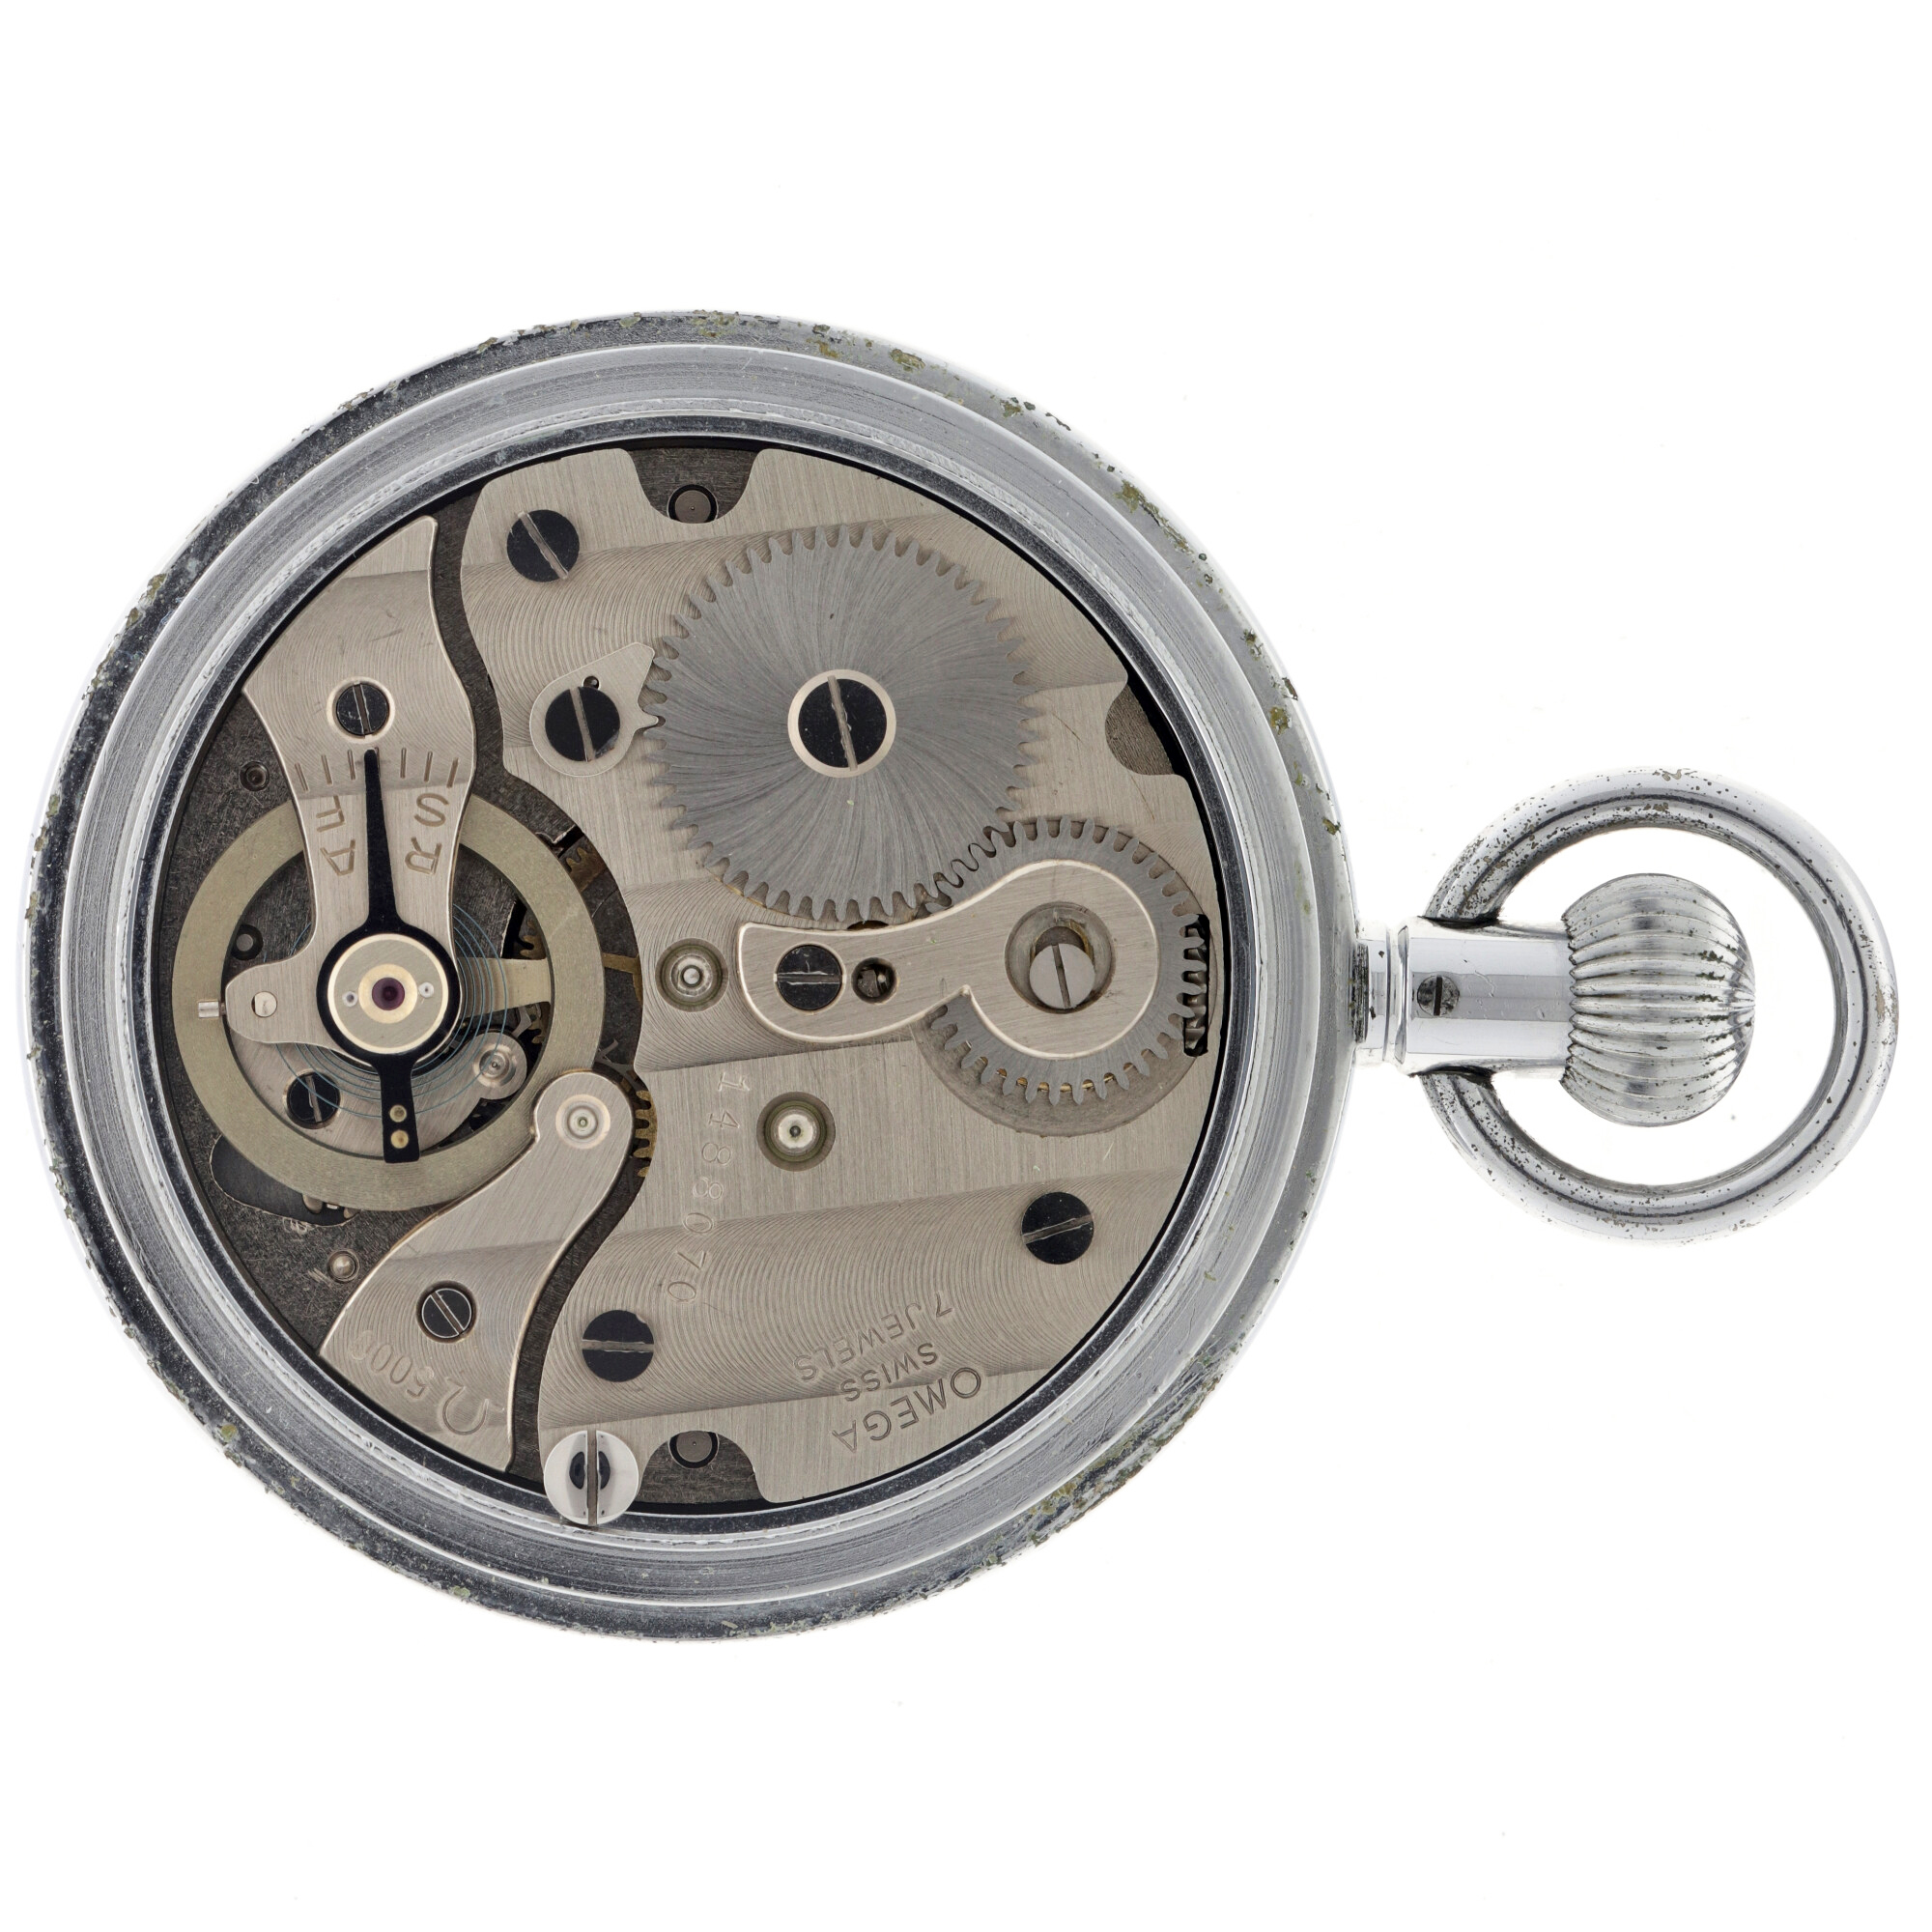 No Reserve - Omega Stopwatch Cal. 5000 - Men's pocketwatch - approx. 1954. - Image 3 of 5